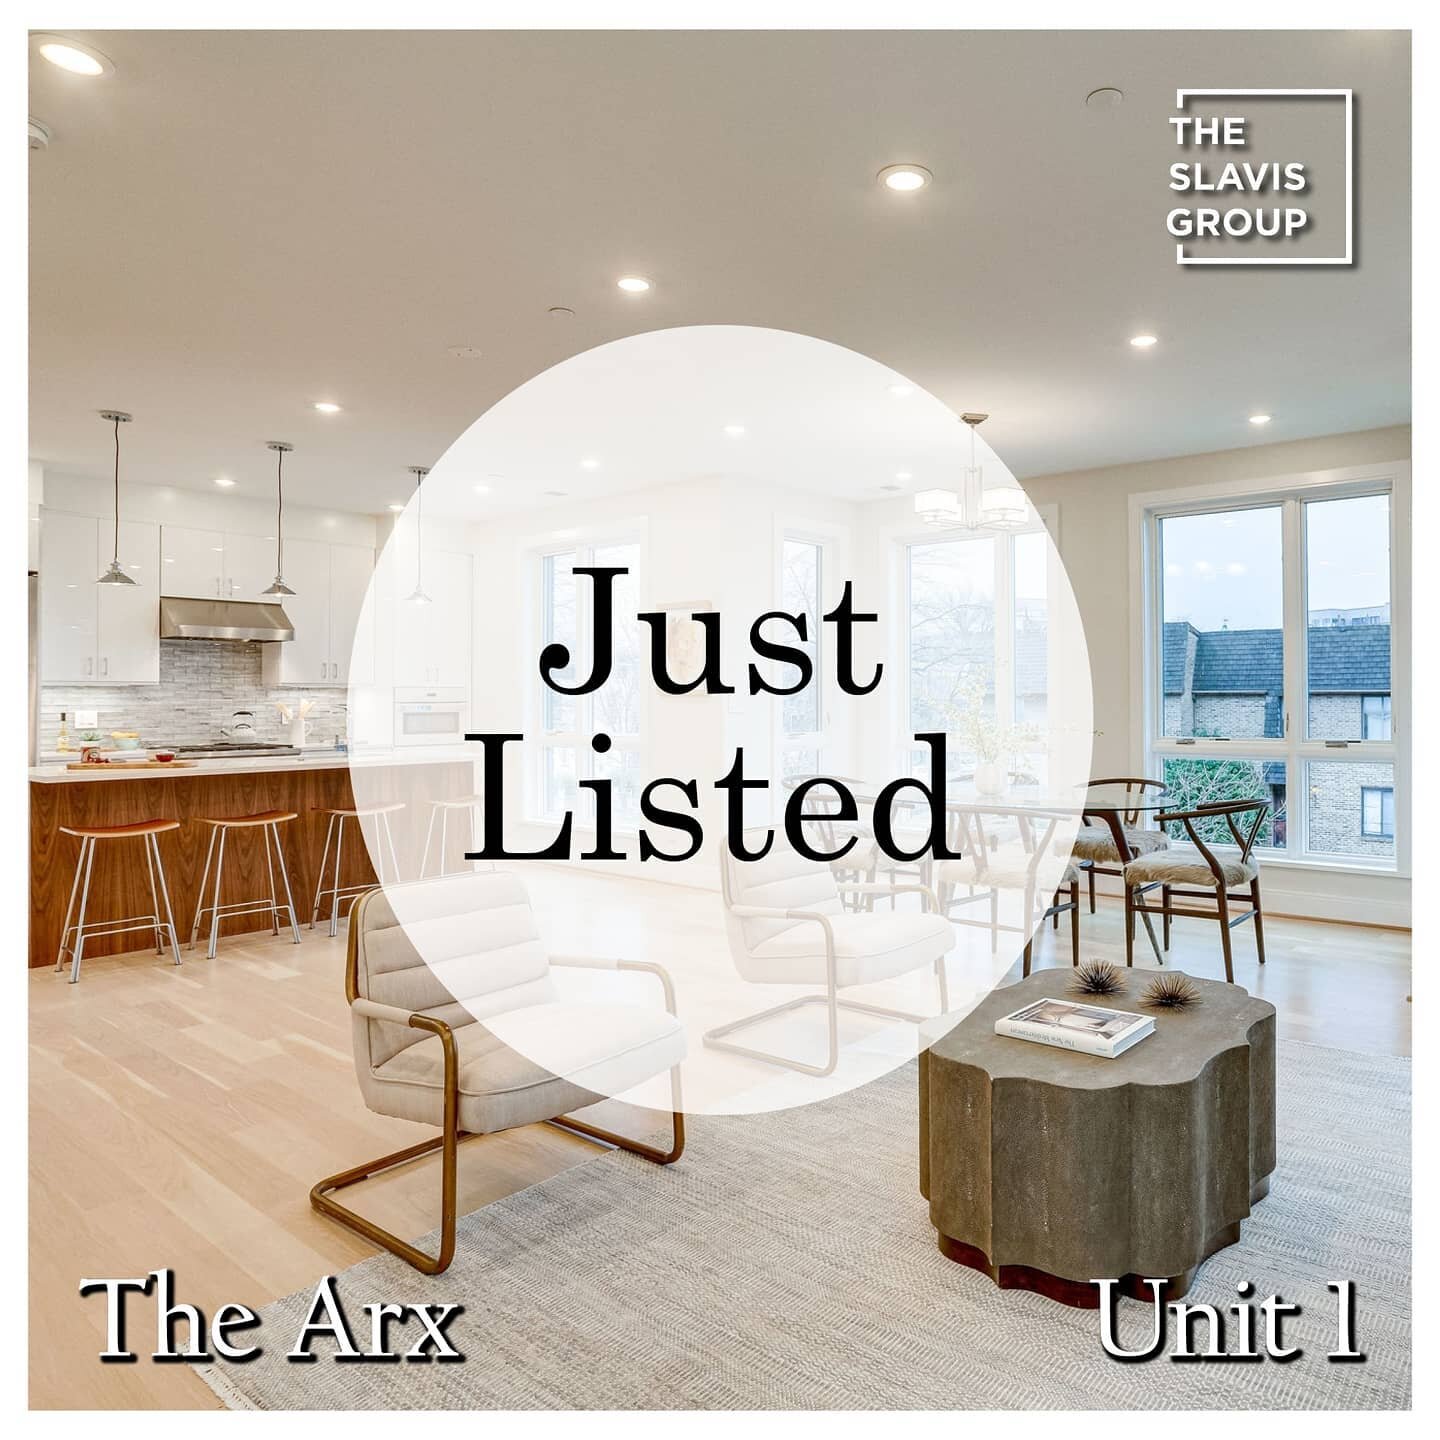 Just listed! Introducing The Arx by Fairchild Development. ⁠
✅H Street Corridor⁠
✅Private Roofdeck⁠
✅Walker's Paradise⁠
✅Top Floor⁠
✅2 Spacious Bedrooms⁠
✅2.5 Baths⁠
✅State-of-the-Art Soundproofing⁠
✅Pet Friendly⁠
✅Miele Appliance Package⁠
✅Custom Ca